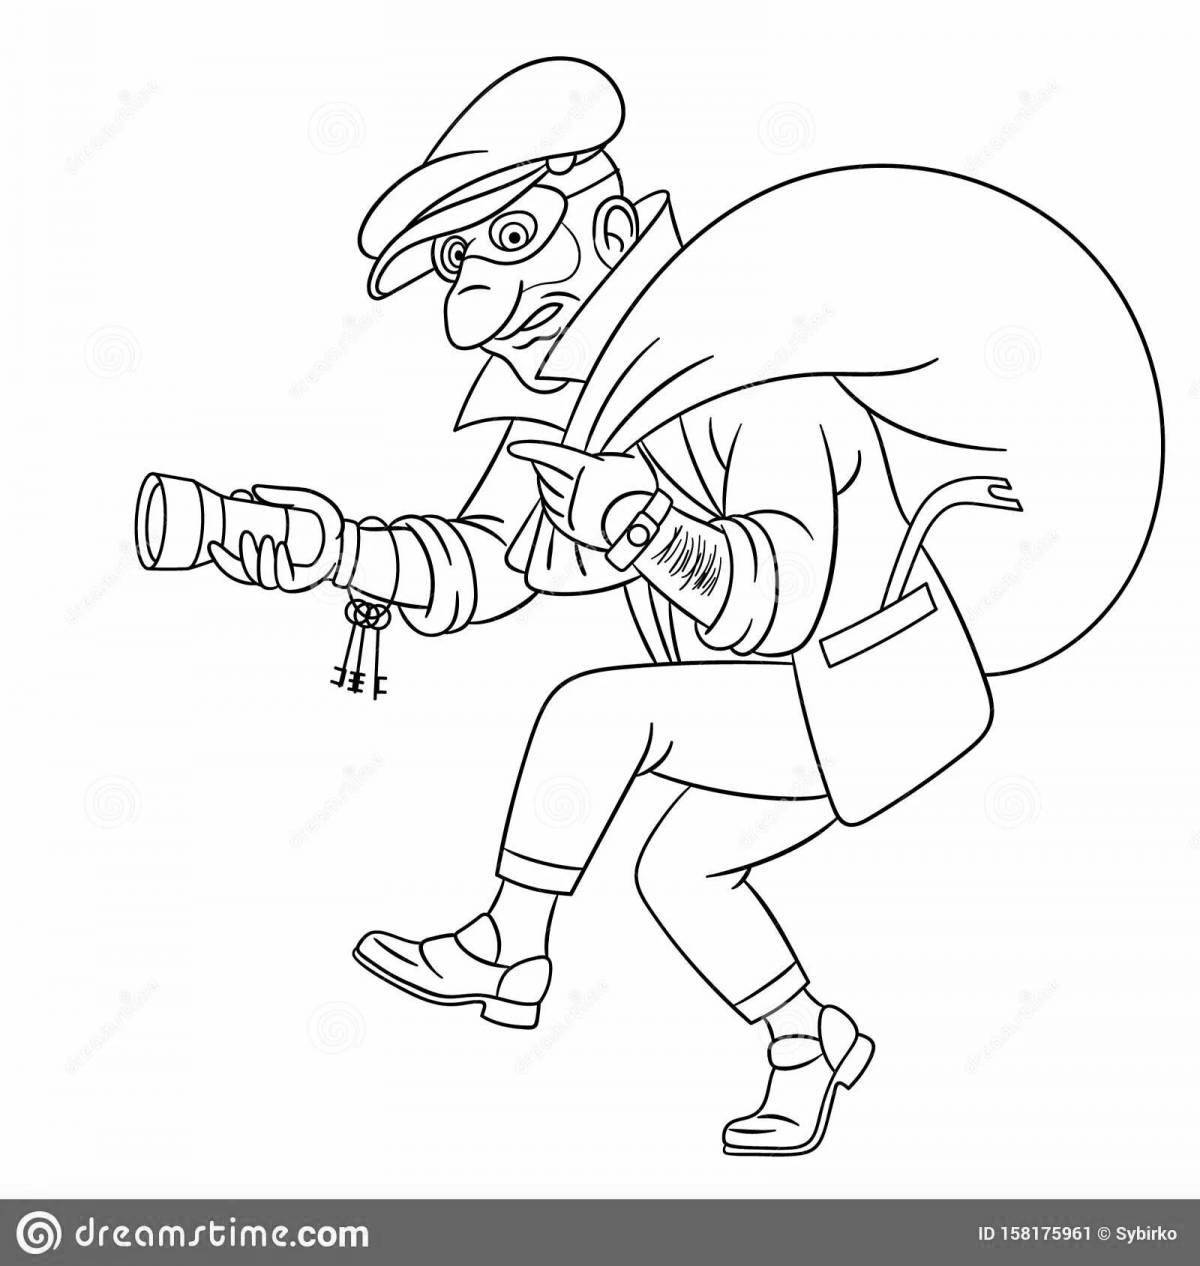 Coloring book bank robbery